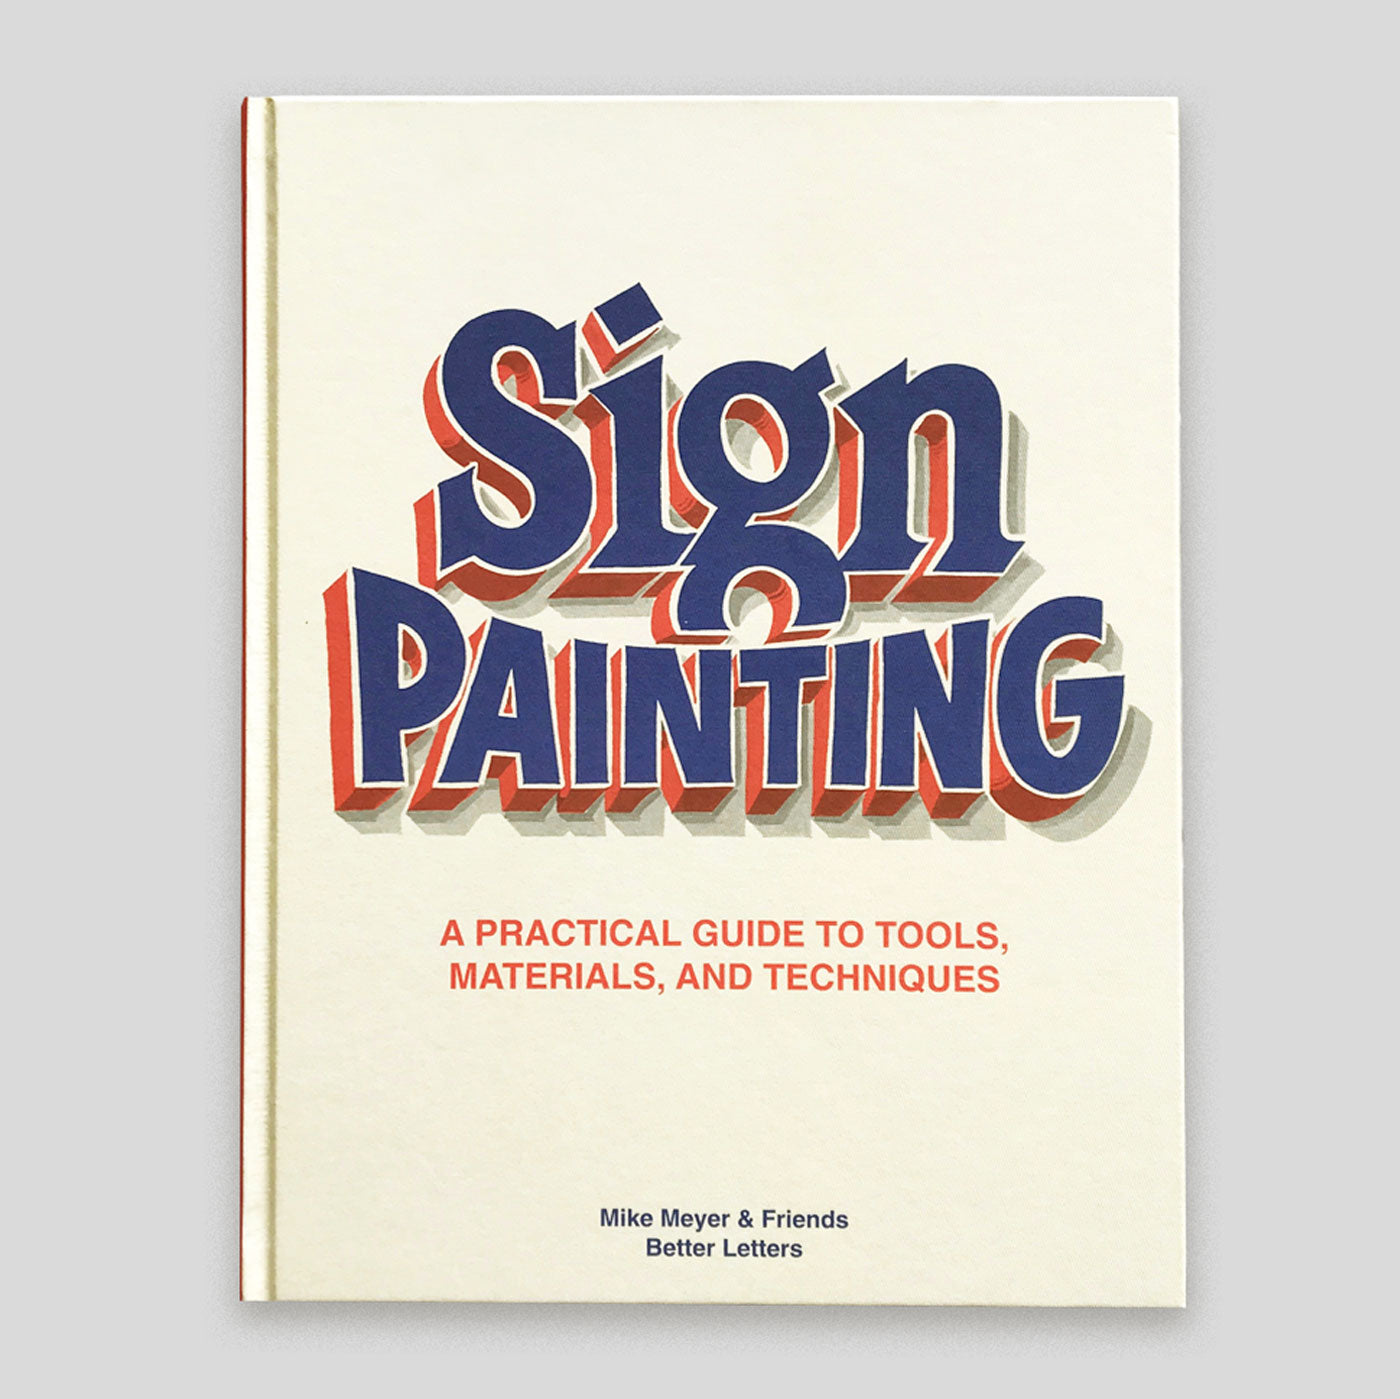 Sign Painting | A Practical Guide to Tools, Materials & Techniques | Mike Meyer & Friends | Colours May Vary 